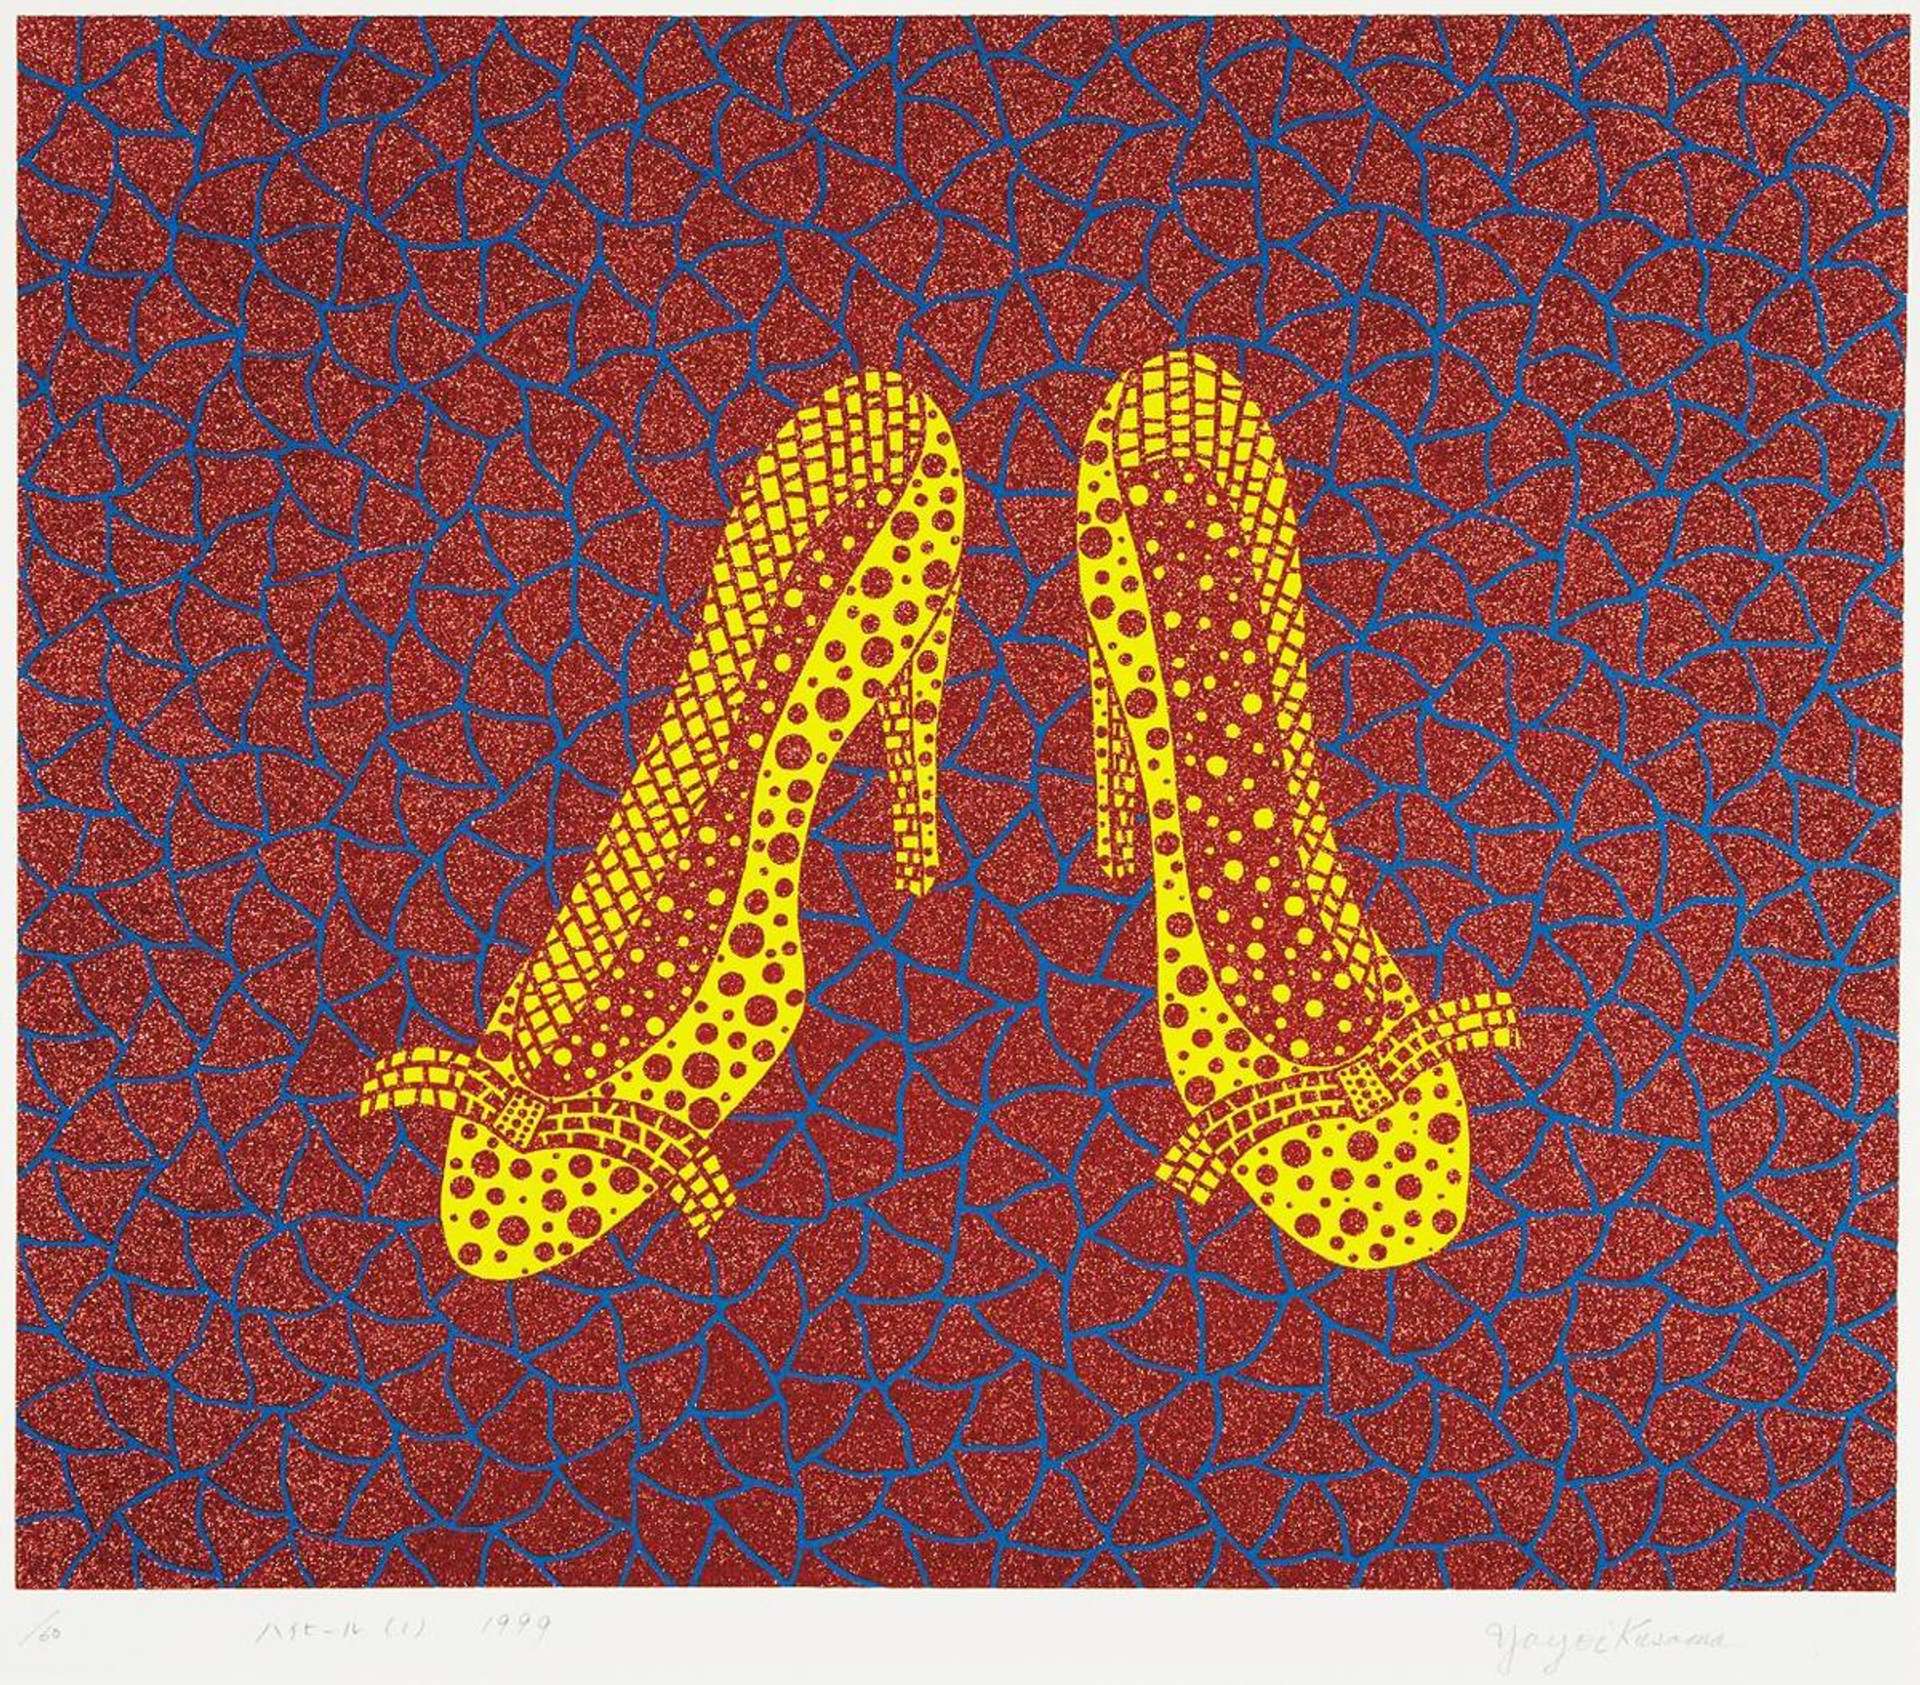 A screenprint by Yayoi Kusama depicting a pair of yellow high heel shoes, set against a red background with a grid-like pattern of blue lines